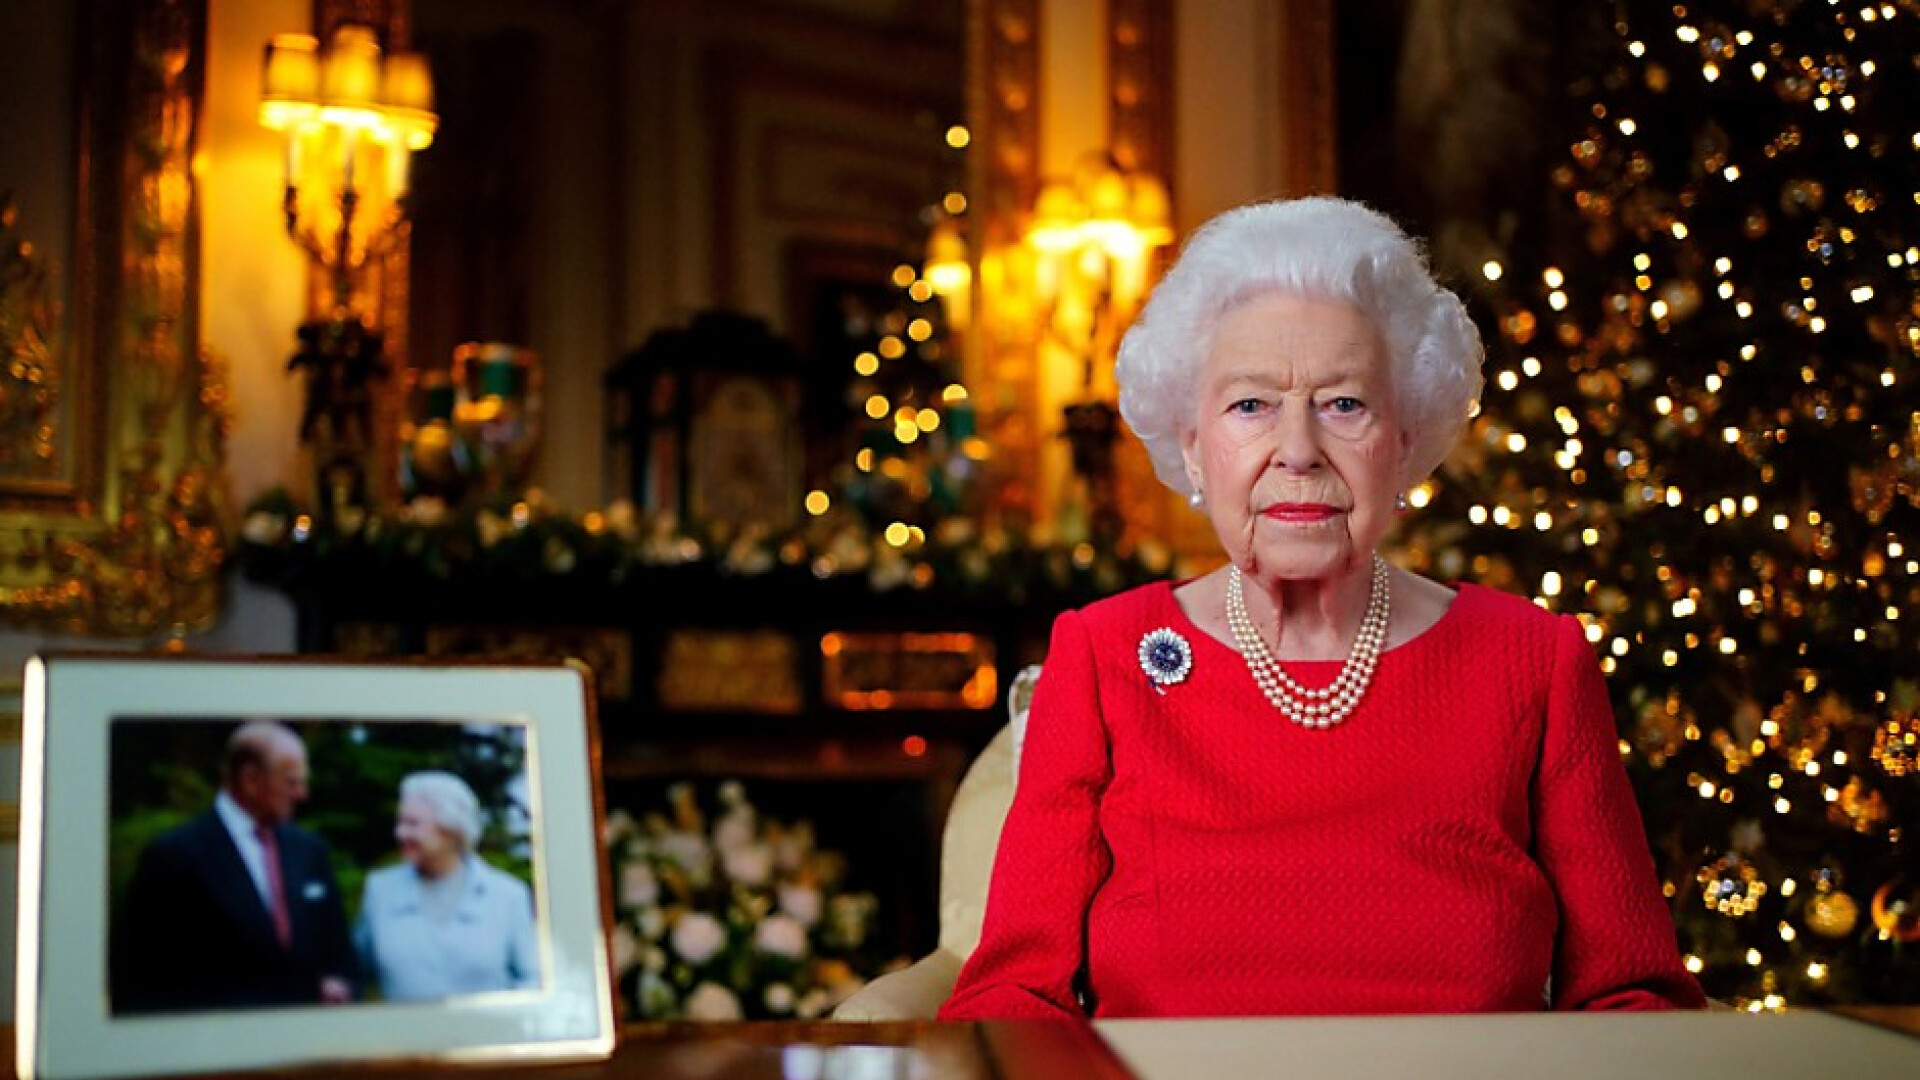 Great Britain - The Queen shows optimism and sadness in her Christmas speech